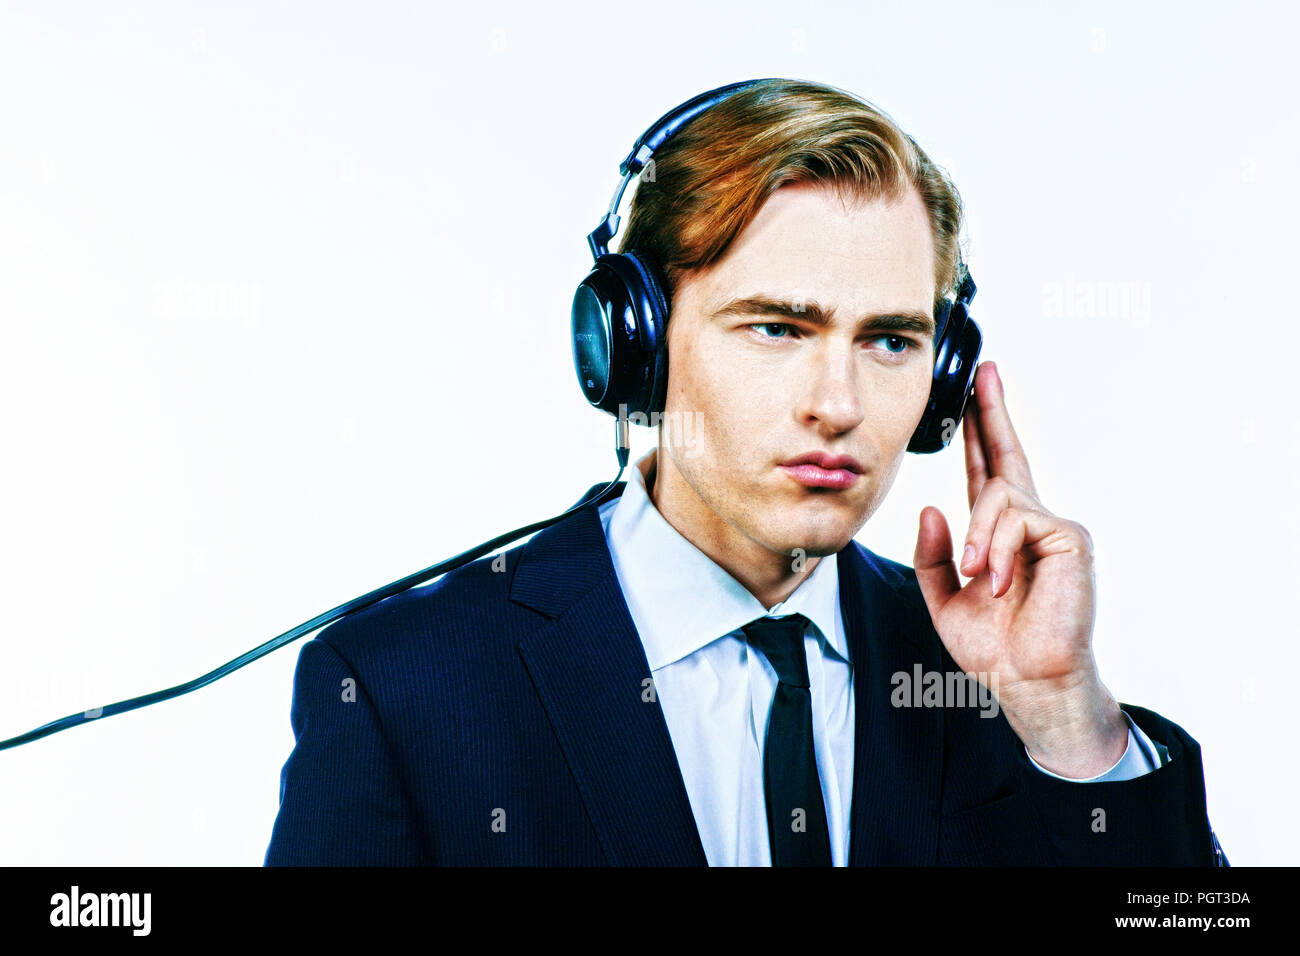 Man in suit listening to music on headphones, isolated on white studio background Stock Photo